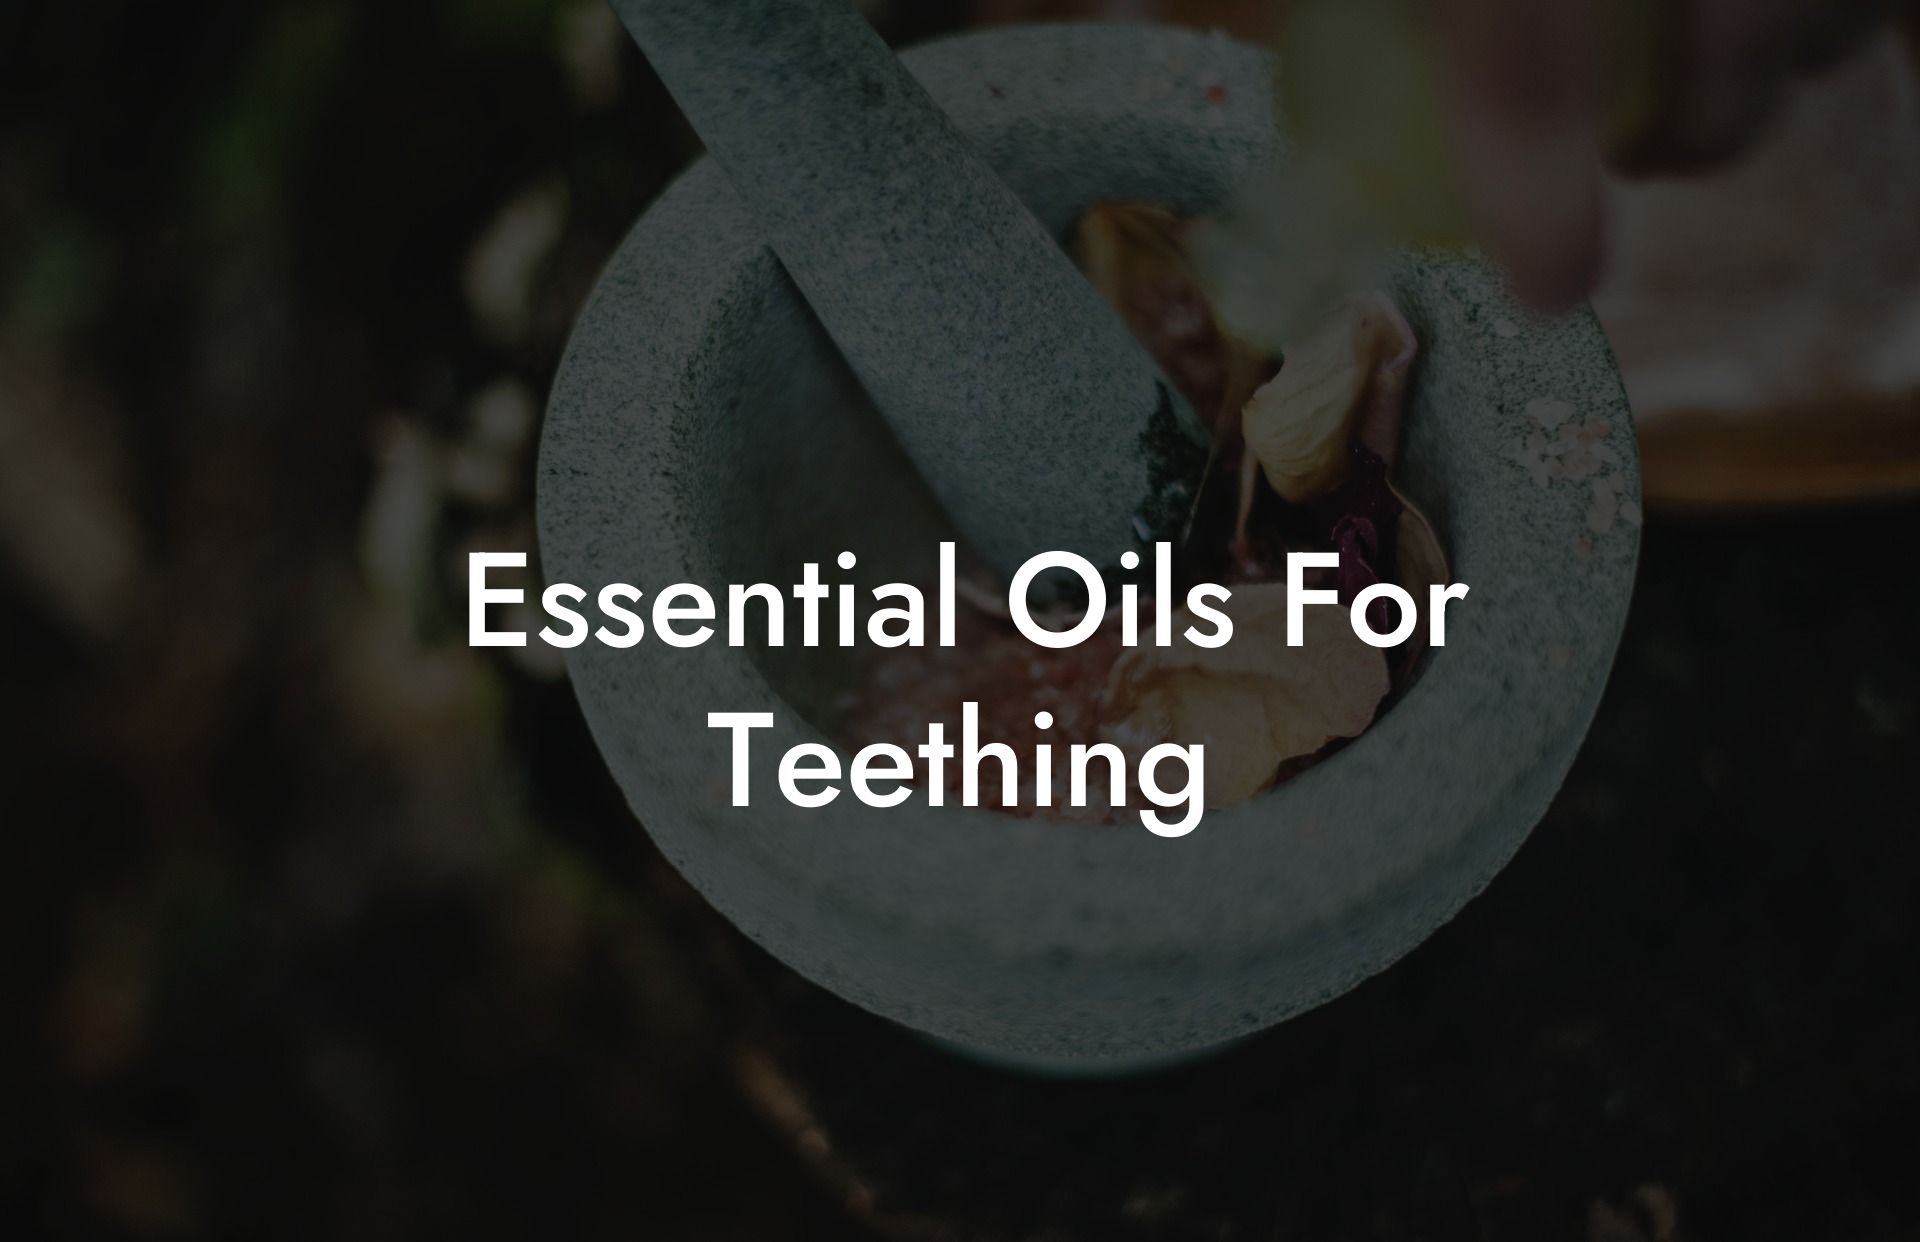 Essential Oils For Teething